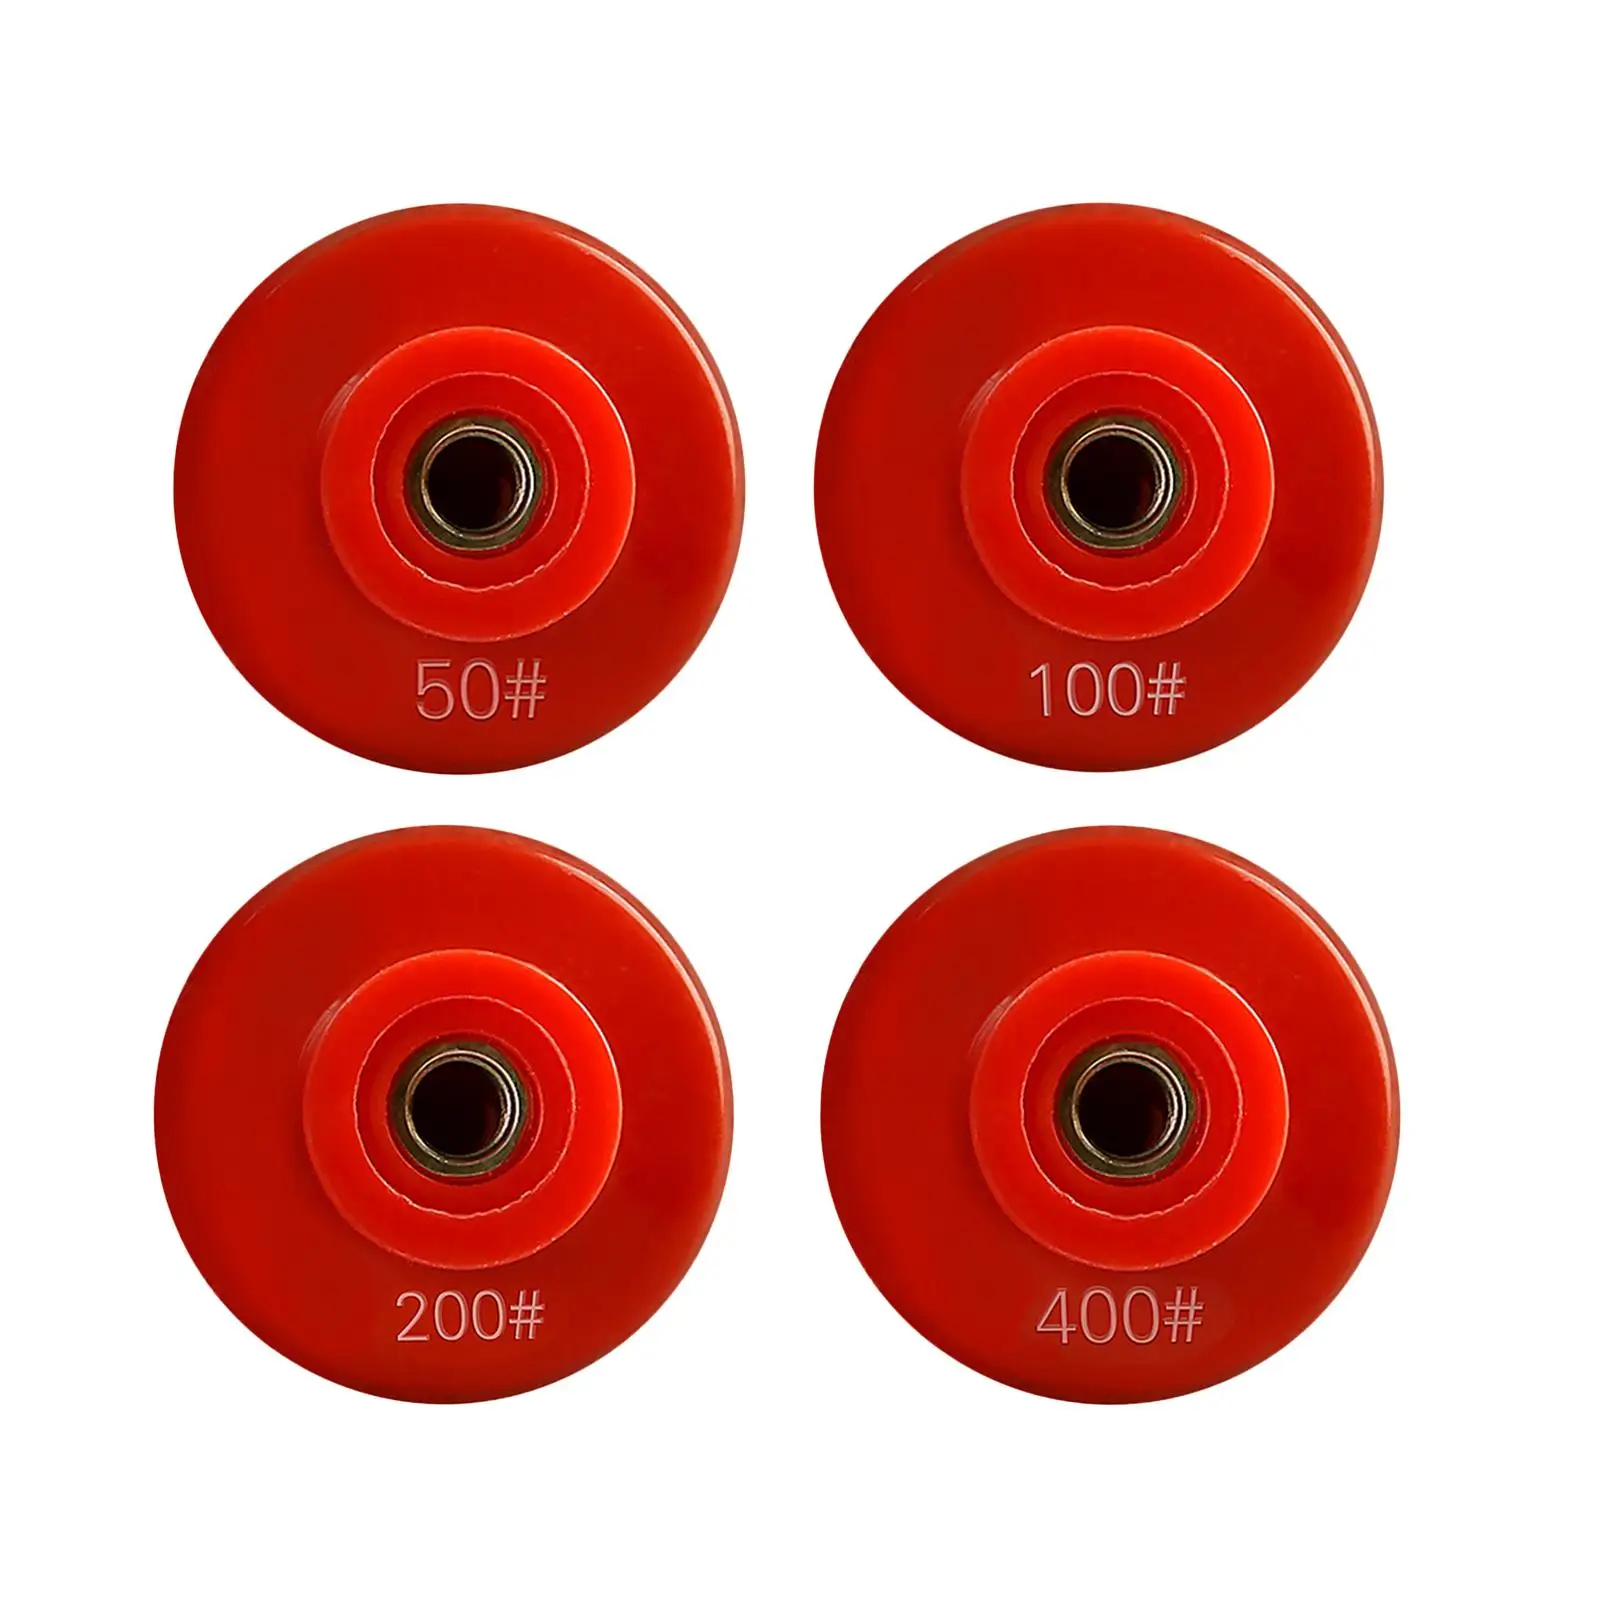 5cm Angle Grinder Grinding Wheel Disc Attachment Polishing Pad M10 Thread Hole for Granite Marble Ceramic Tile Wear Resistant